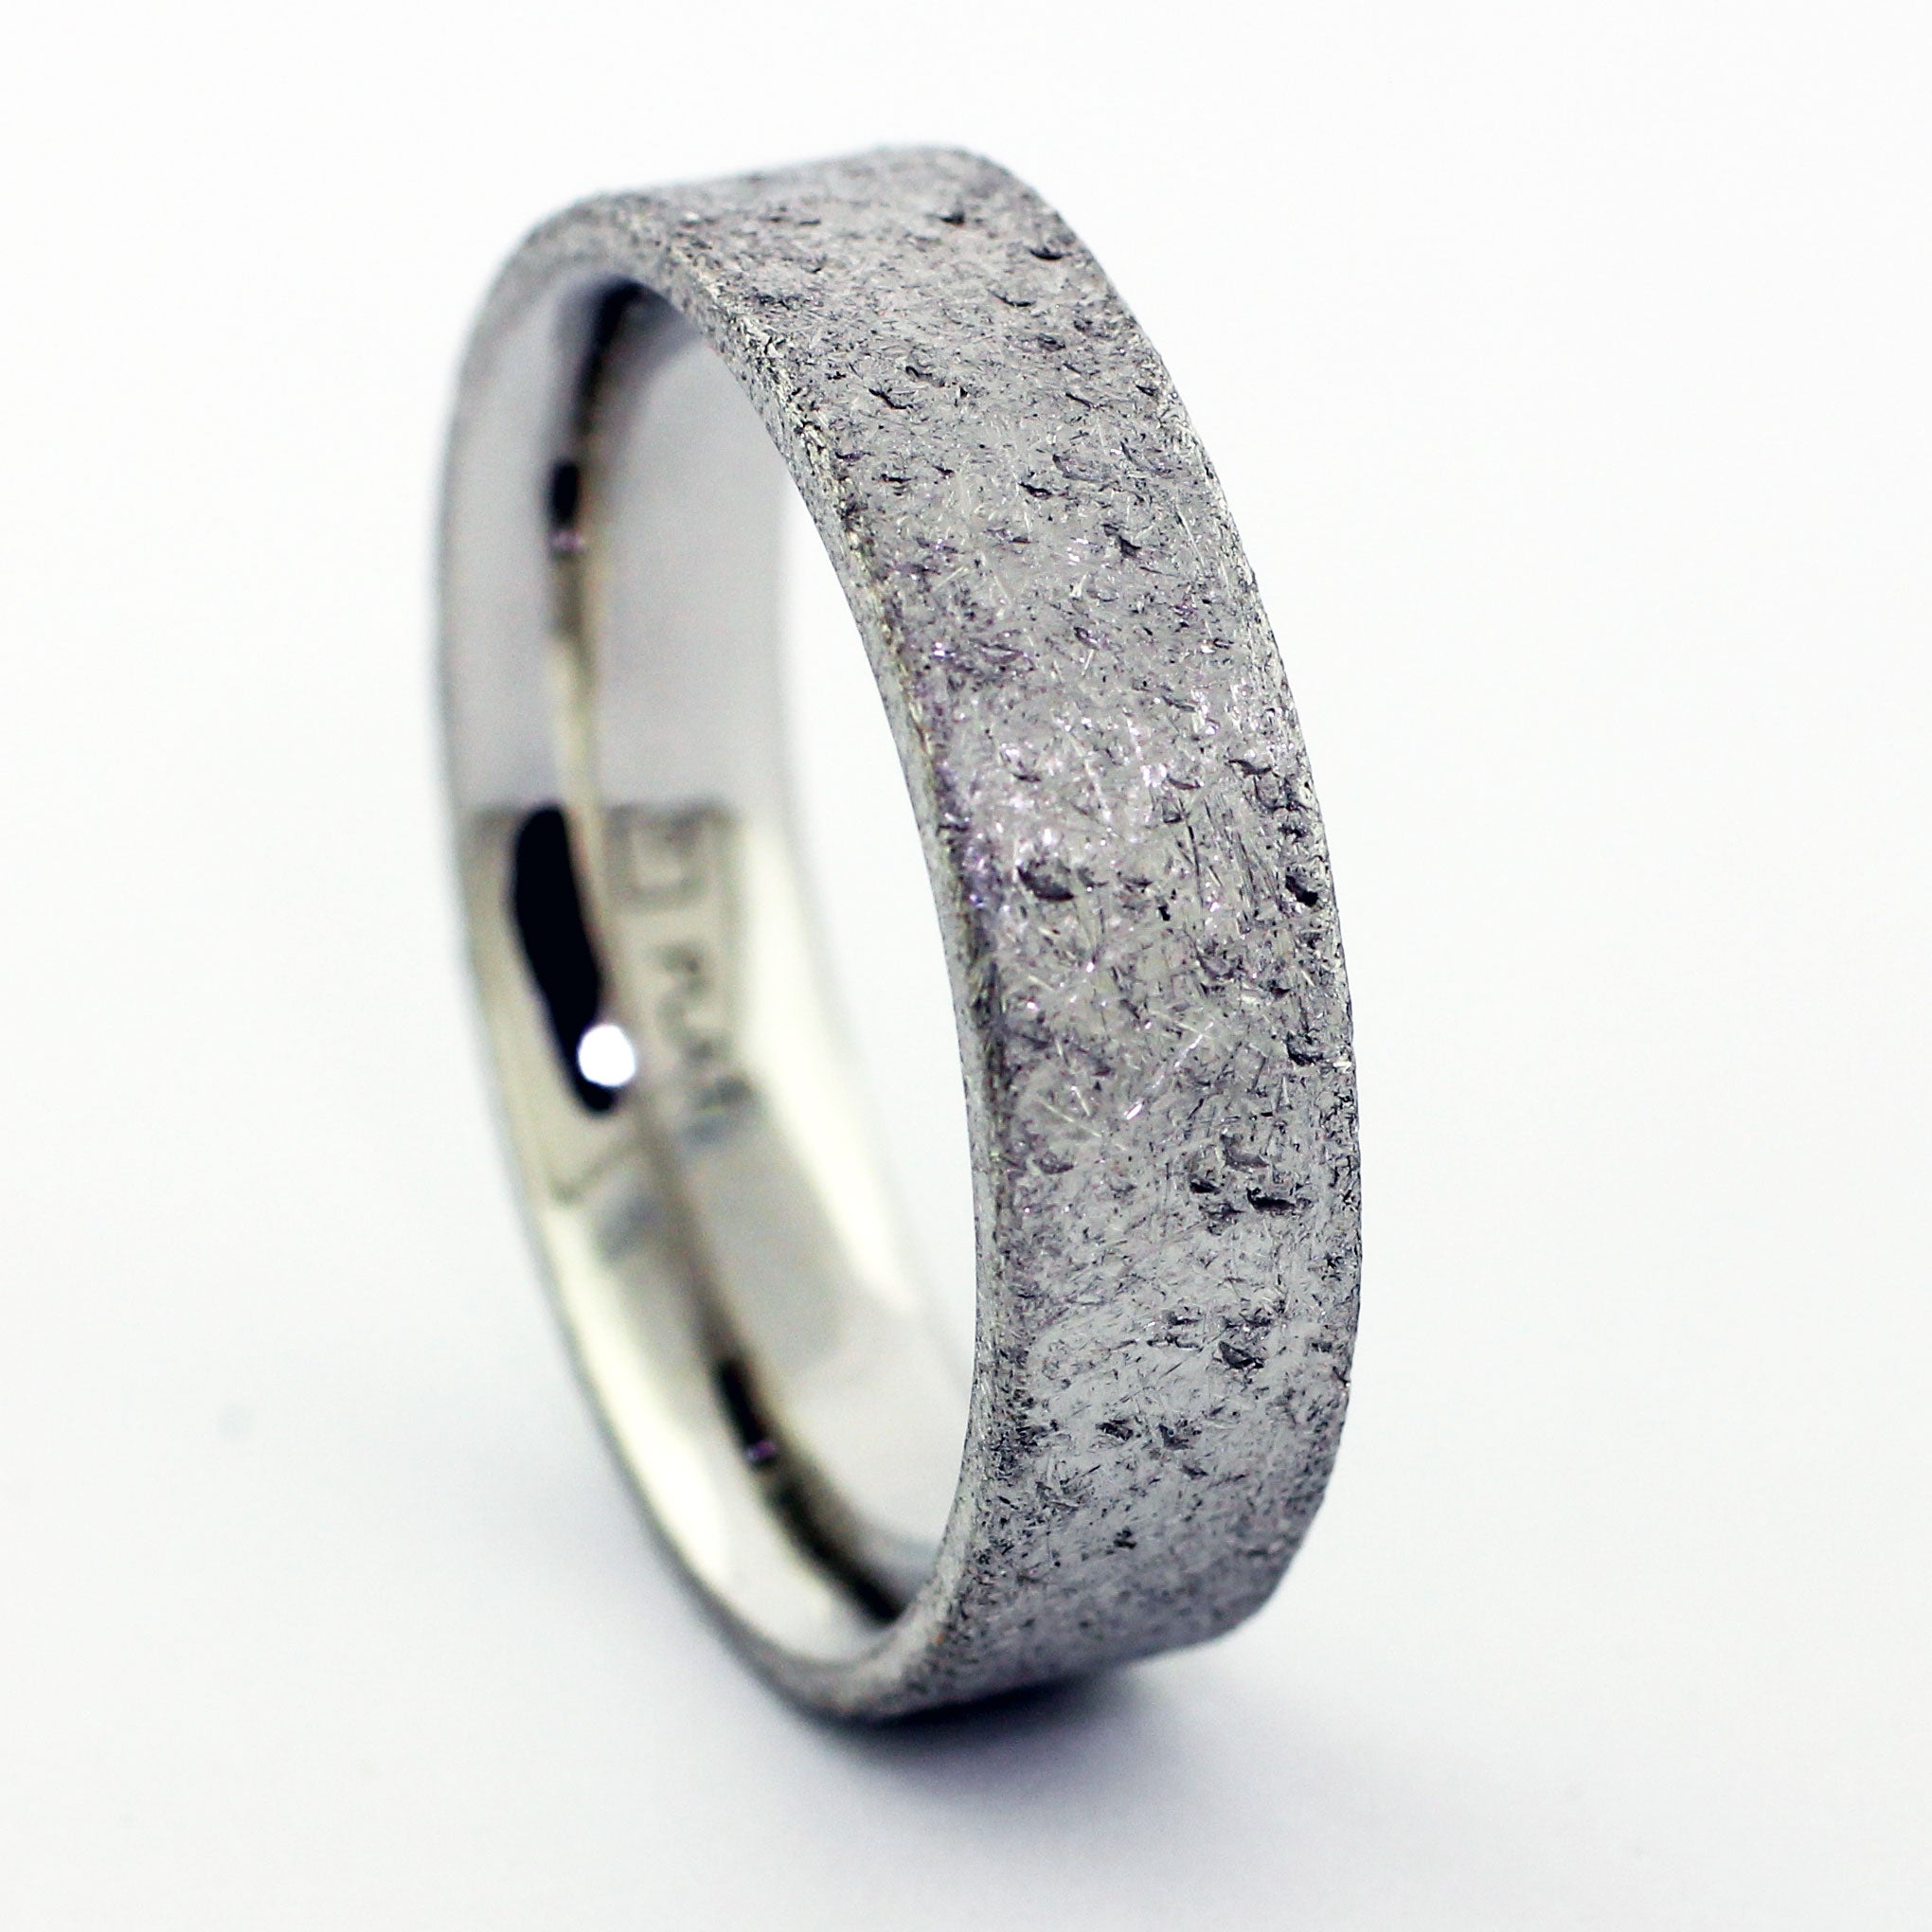 Rough, rustic, and distressed. A new scratch or scuff will only add to it's beauty. A timeless wedding band that can be dressed up or stripped down to meet the needs of the wearer. -Made to order and hand fabricated from palladium-